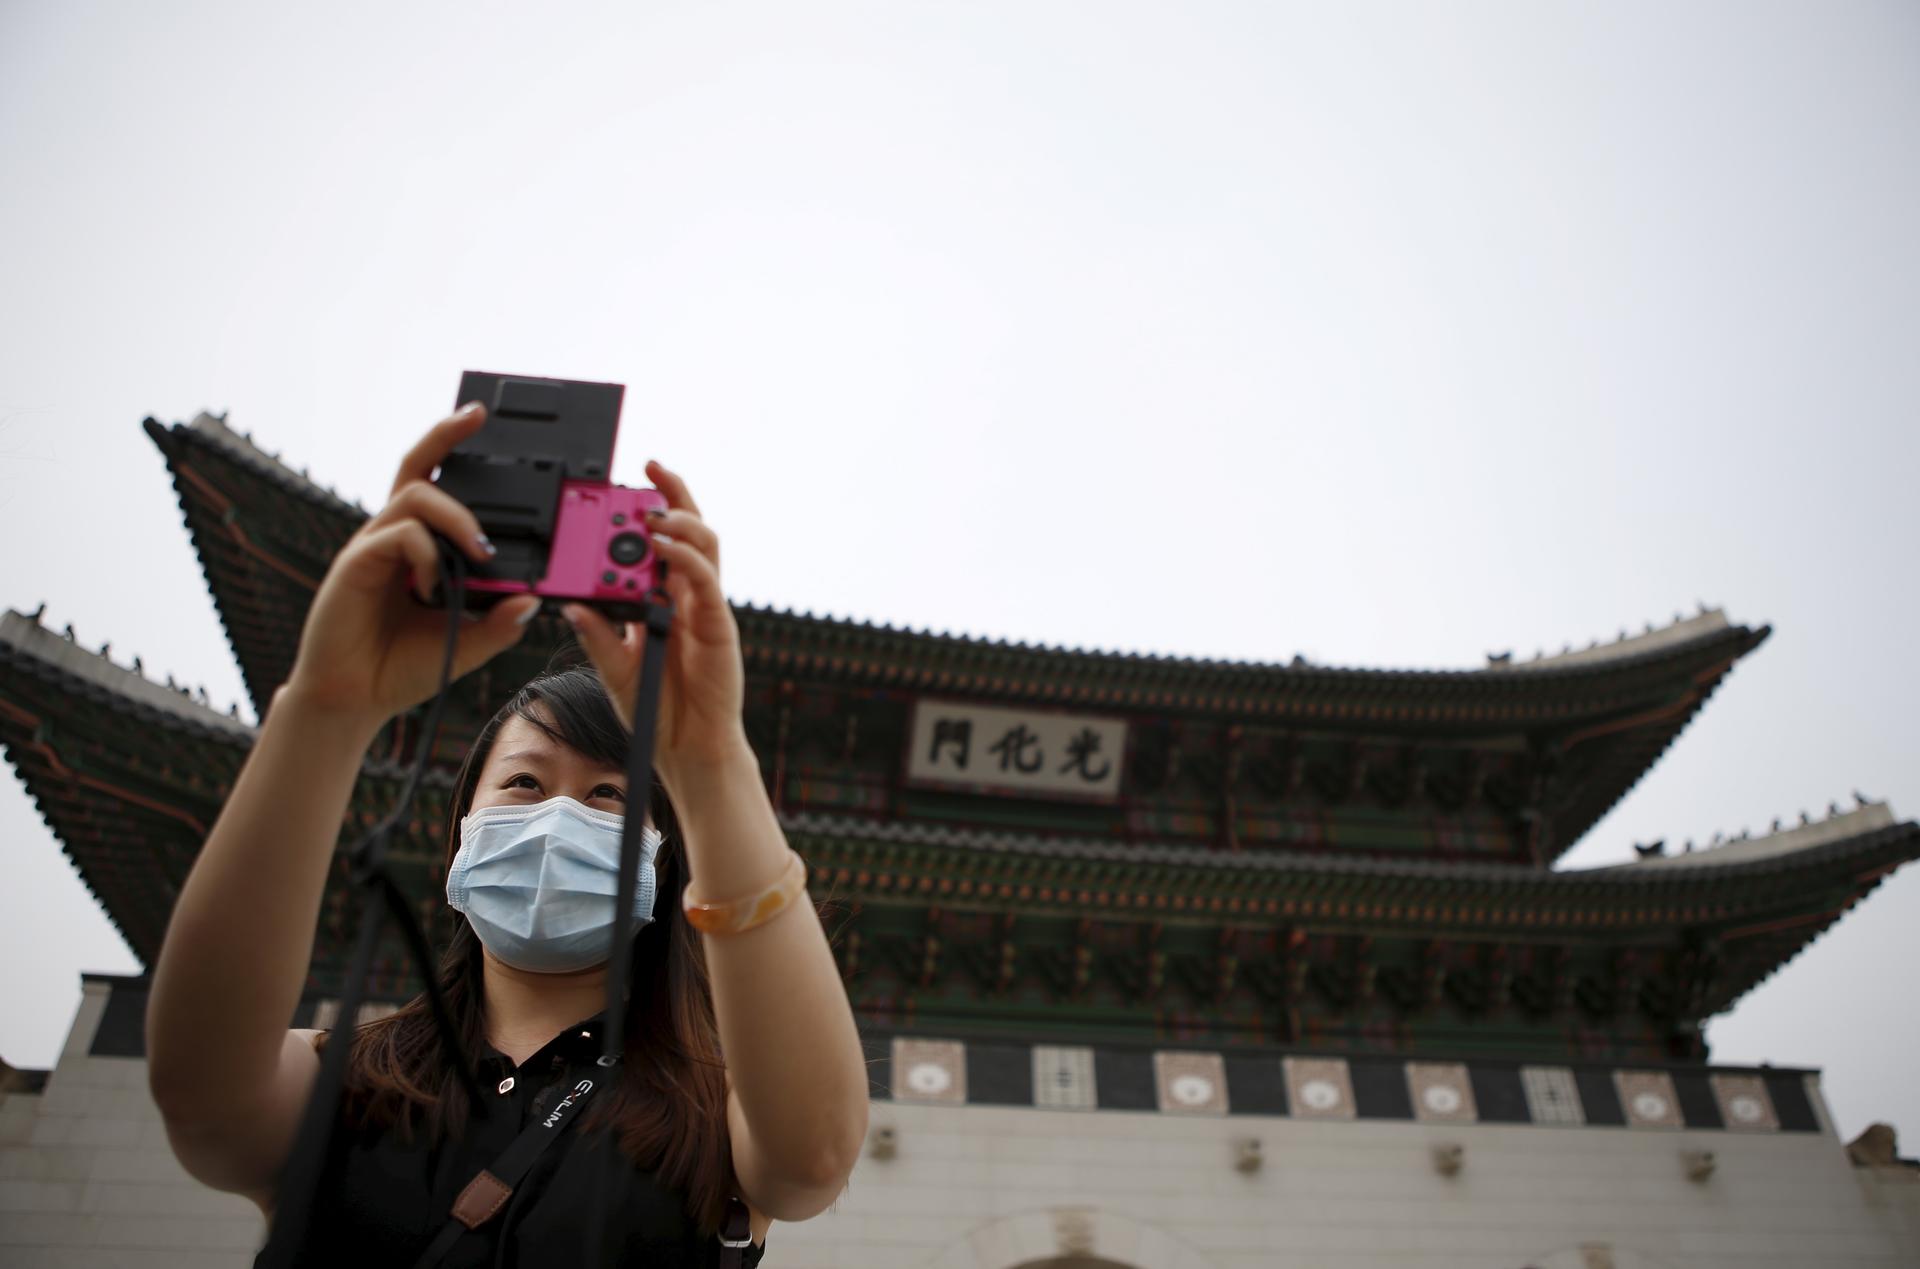 Chinese tourist wearing a mask to prevent contracting Middle East Respiratory Syndrome (MERS) takes a selfie in front of the main entrance of the Gyeongbok Palace in central Seoul, South Korea on June 4, 2015.